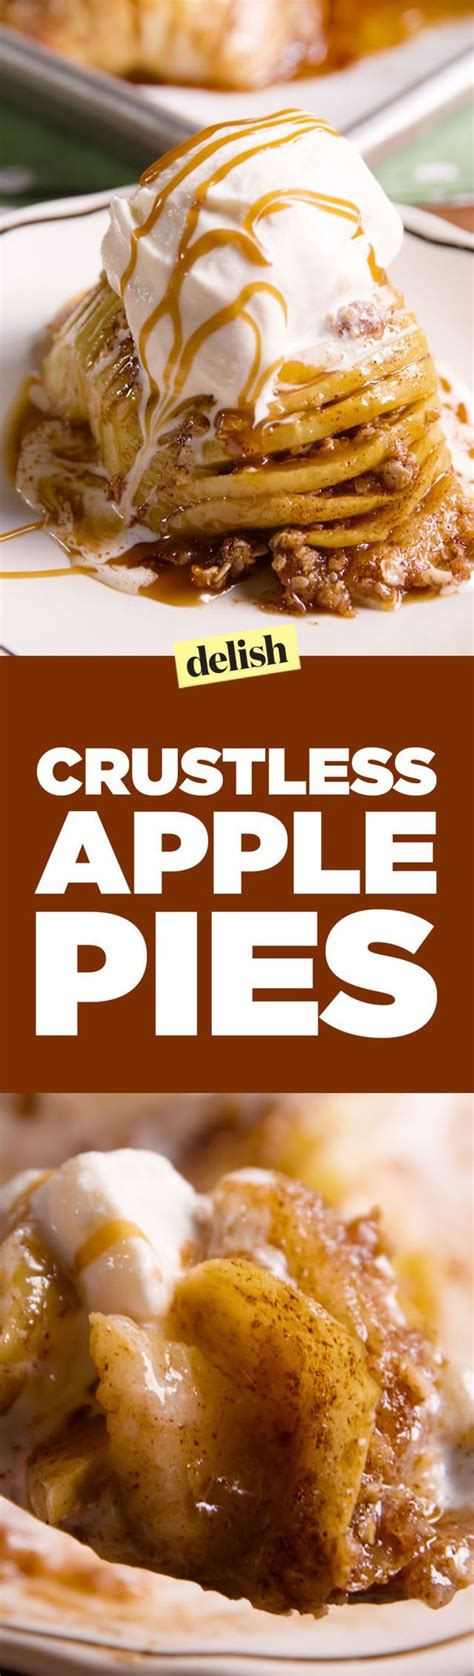 Crustless Apple Pies Only Give You The Best Part Of The Pie Food Baking Recipes Dessert Recipes